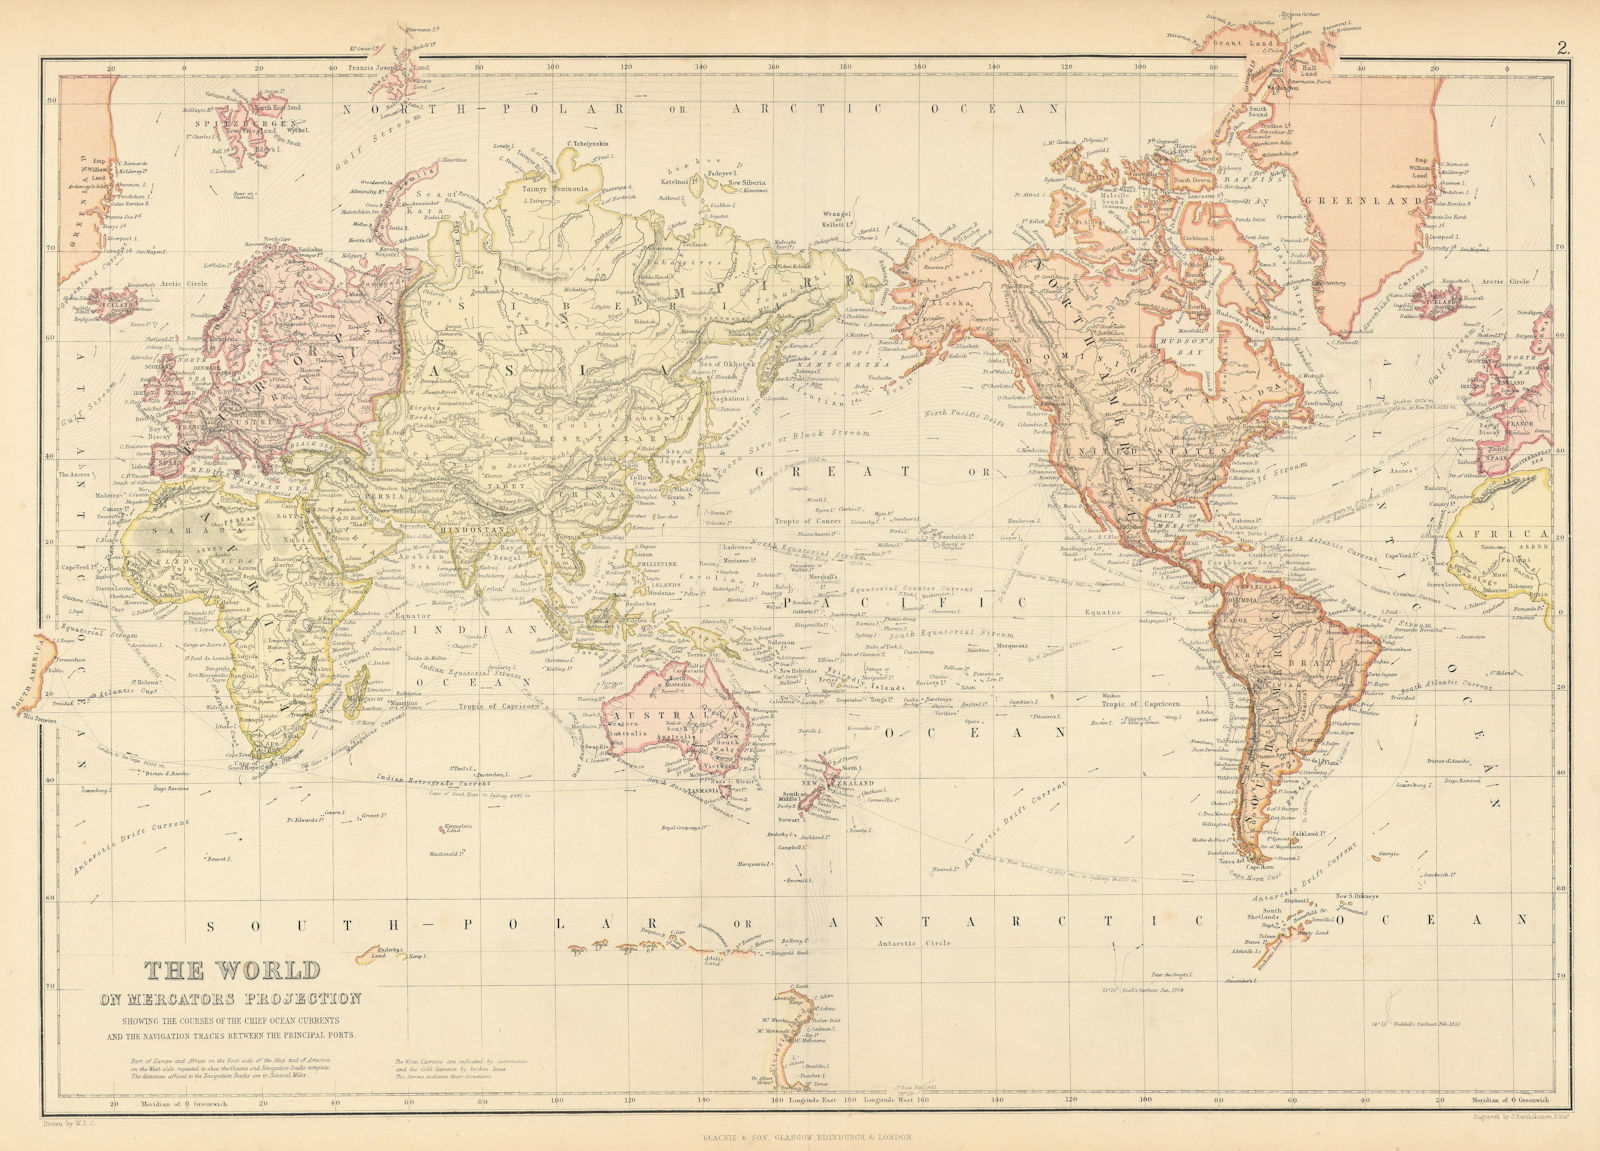 WORLD. Mercator's projection. Ocean currents & shipping routes. BLACKIE 1886 map